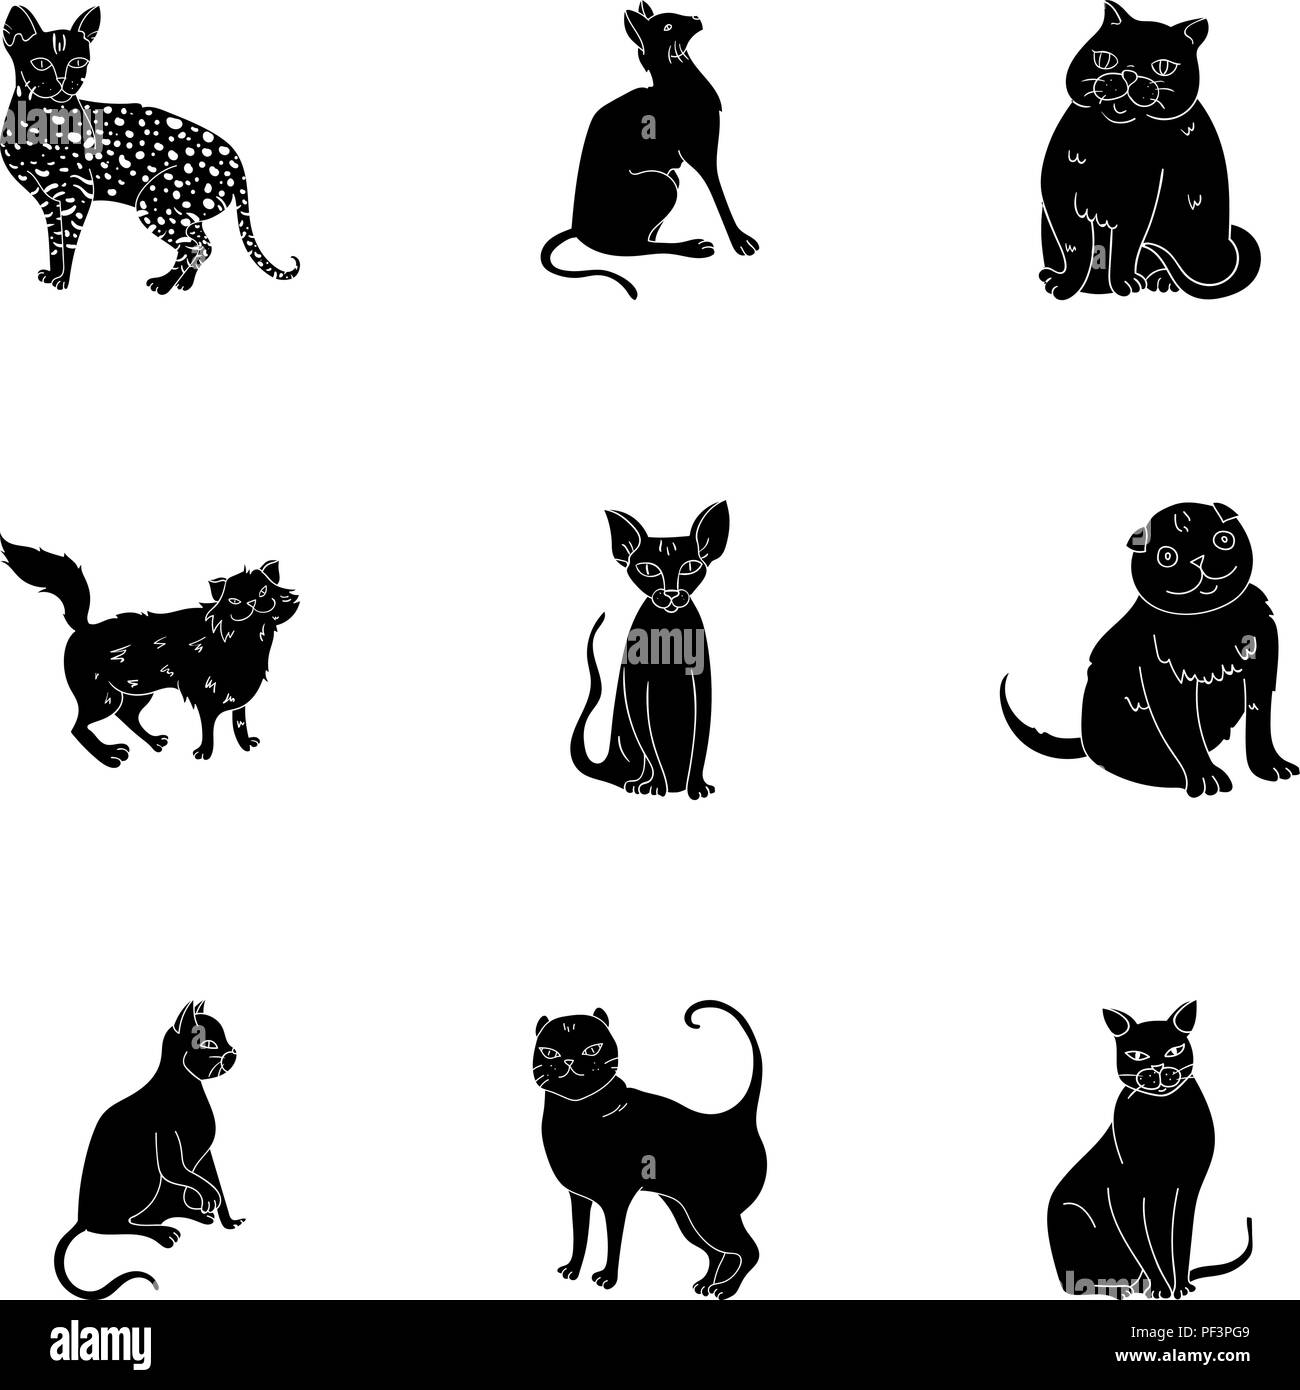 bald,black,cat,cats,chest,collection,curly,different,ears,egyptian,evil,fat,good,gray,icon,illustration,isolated,leopard,logo,neck,object,one,picture,set,sign,sphinx,spotted,striped,symbol,tail,thin,vector,web,white, Vector Vectors , Stock Vector